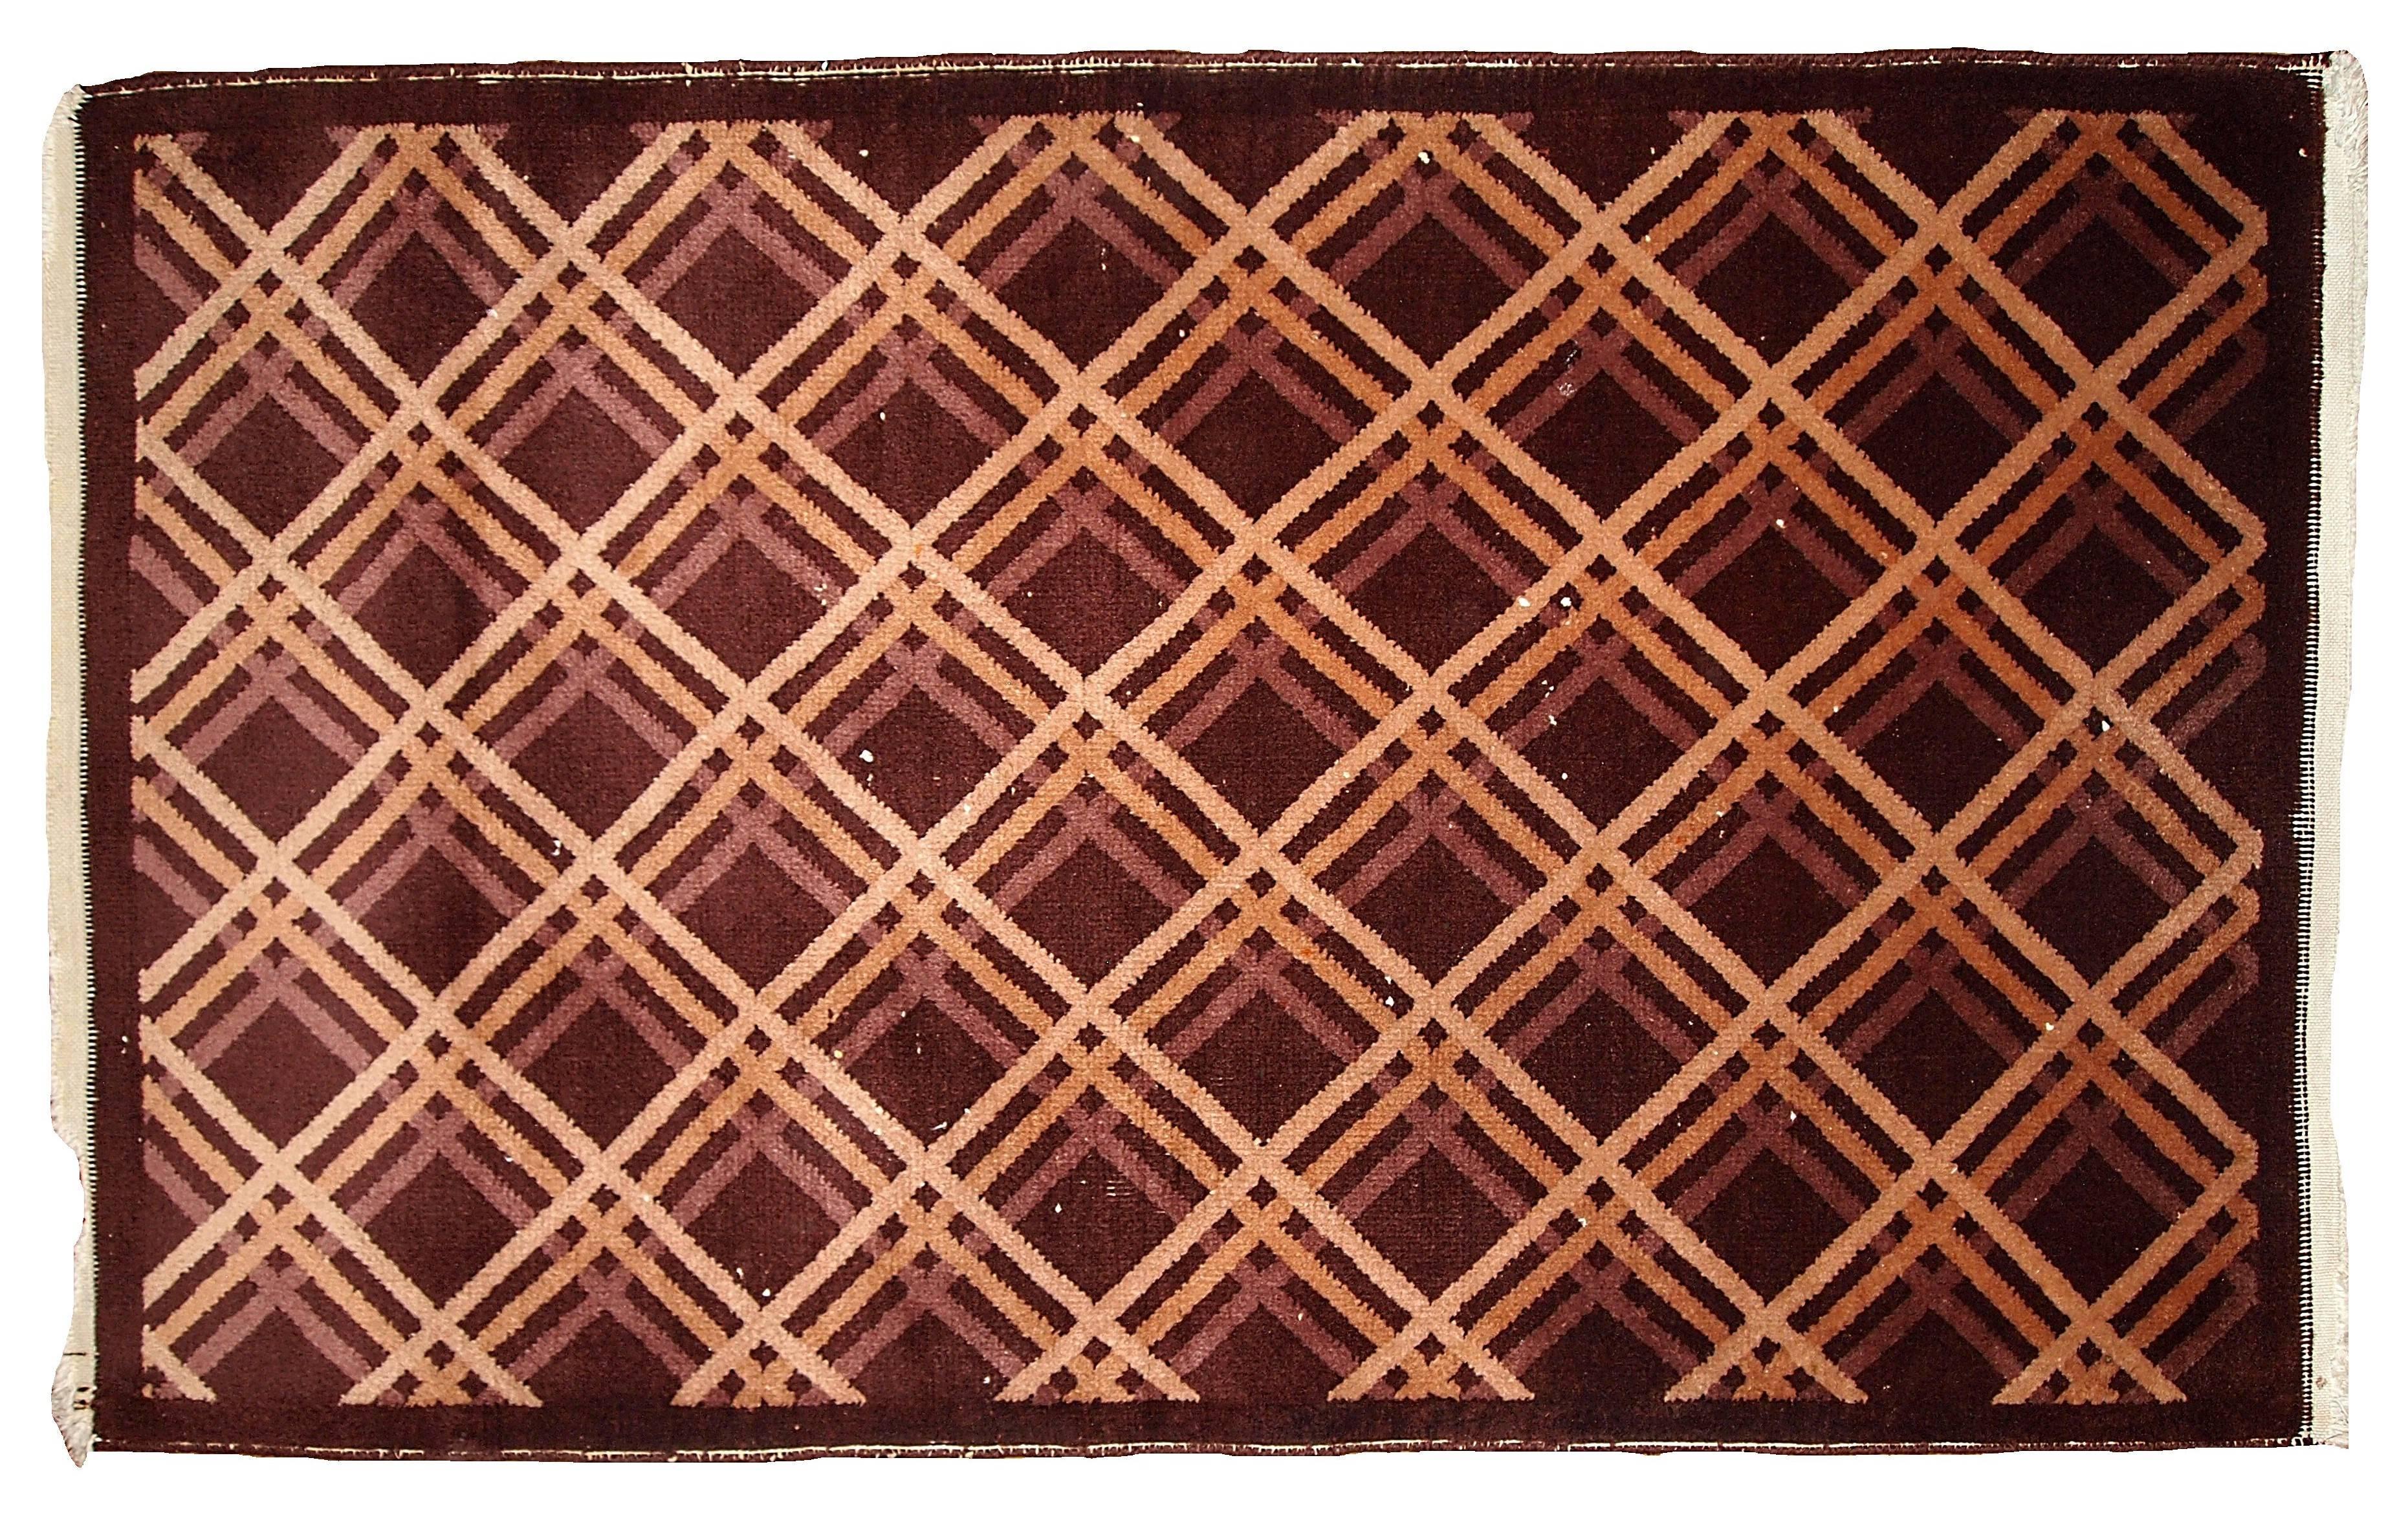 Antique handmade geometric Nichol Chinese rug. Very unusual design for that age but very modern and fashionable today. There are not so many of geometric Chinese's of 1920s possible to find, what makes this rug unique. Chocolate brown, burgundy,